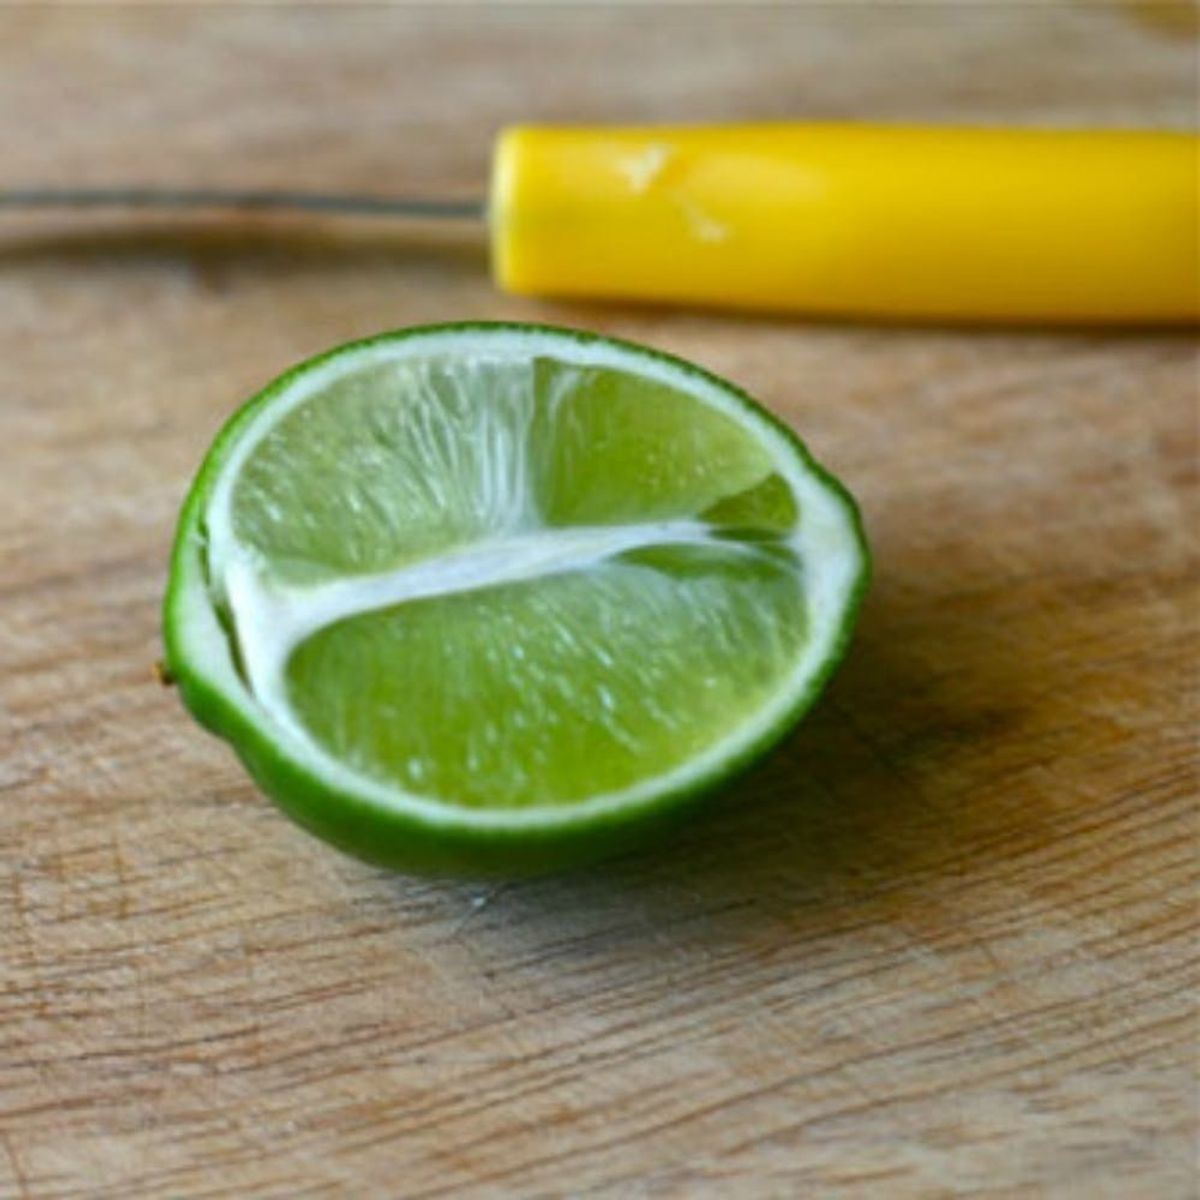 I Tried Lime As Deodorant and Here’s What Happened